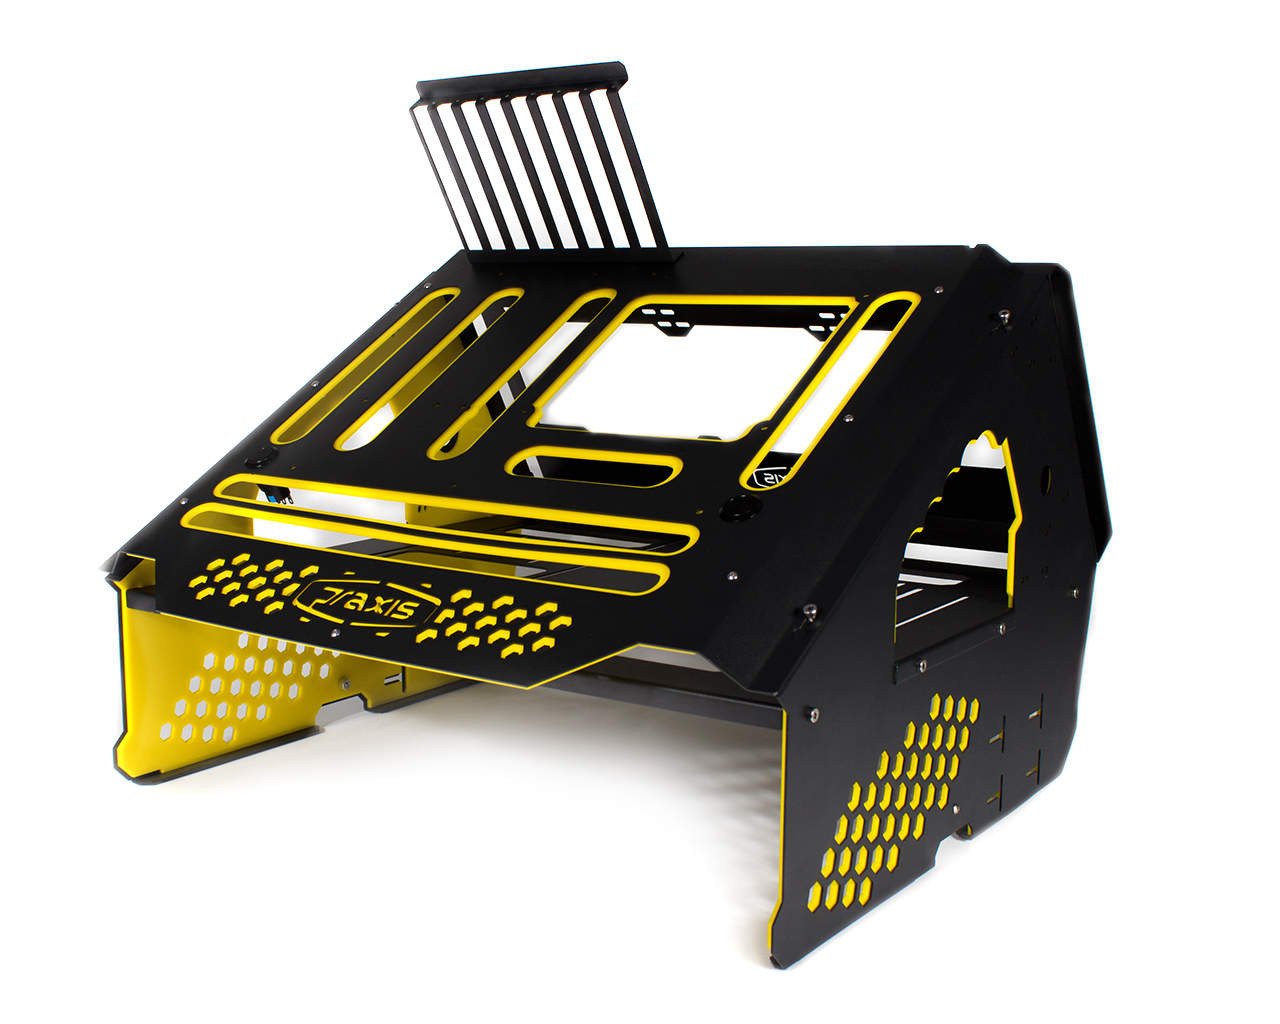 WetBench – PrimoChill KEEPING IT